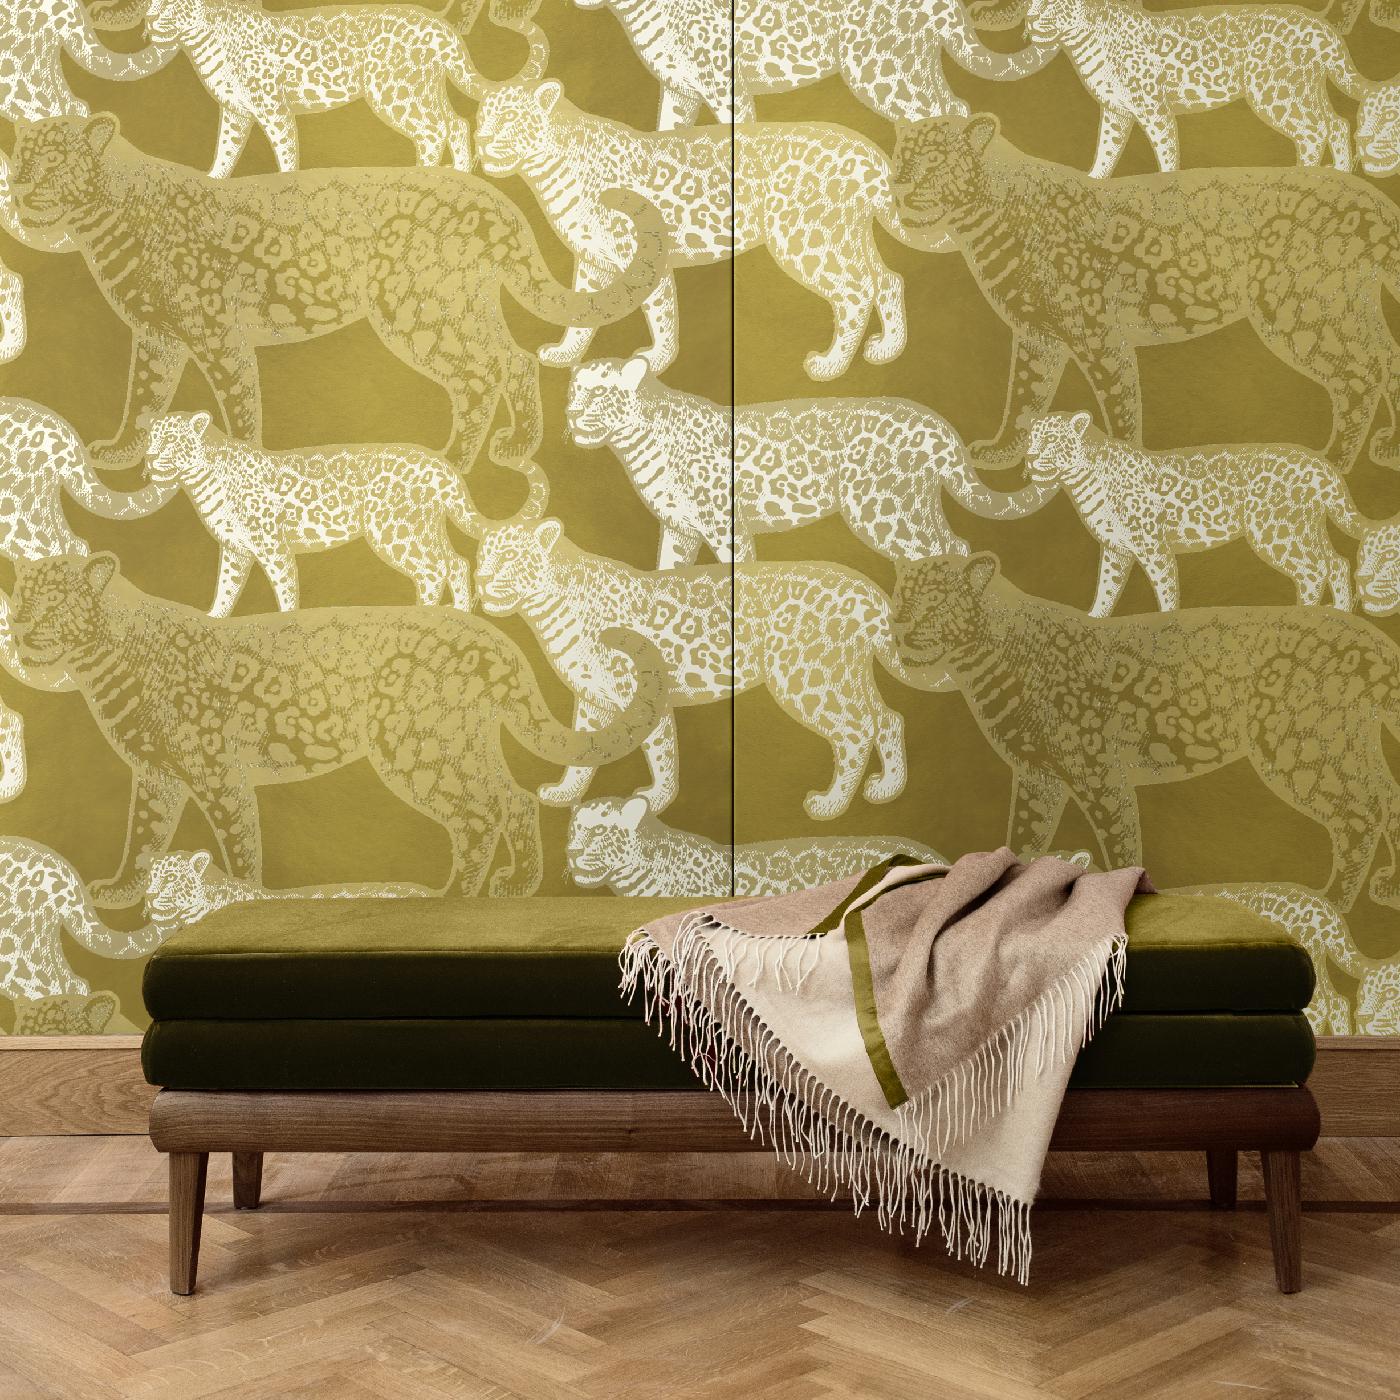 Part of the Walking Leopards collection, this wall covering is a bold and elegant choice for a modern interior. It will make a statement in an entryway, study, or powder room, where the combination of warm colors and the mesmerizing scene depicted